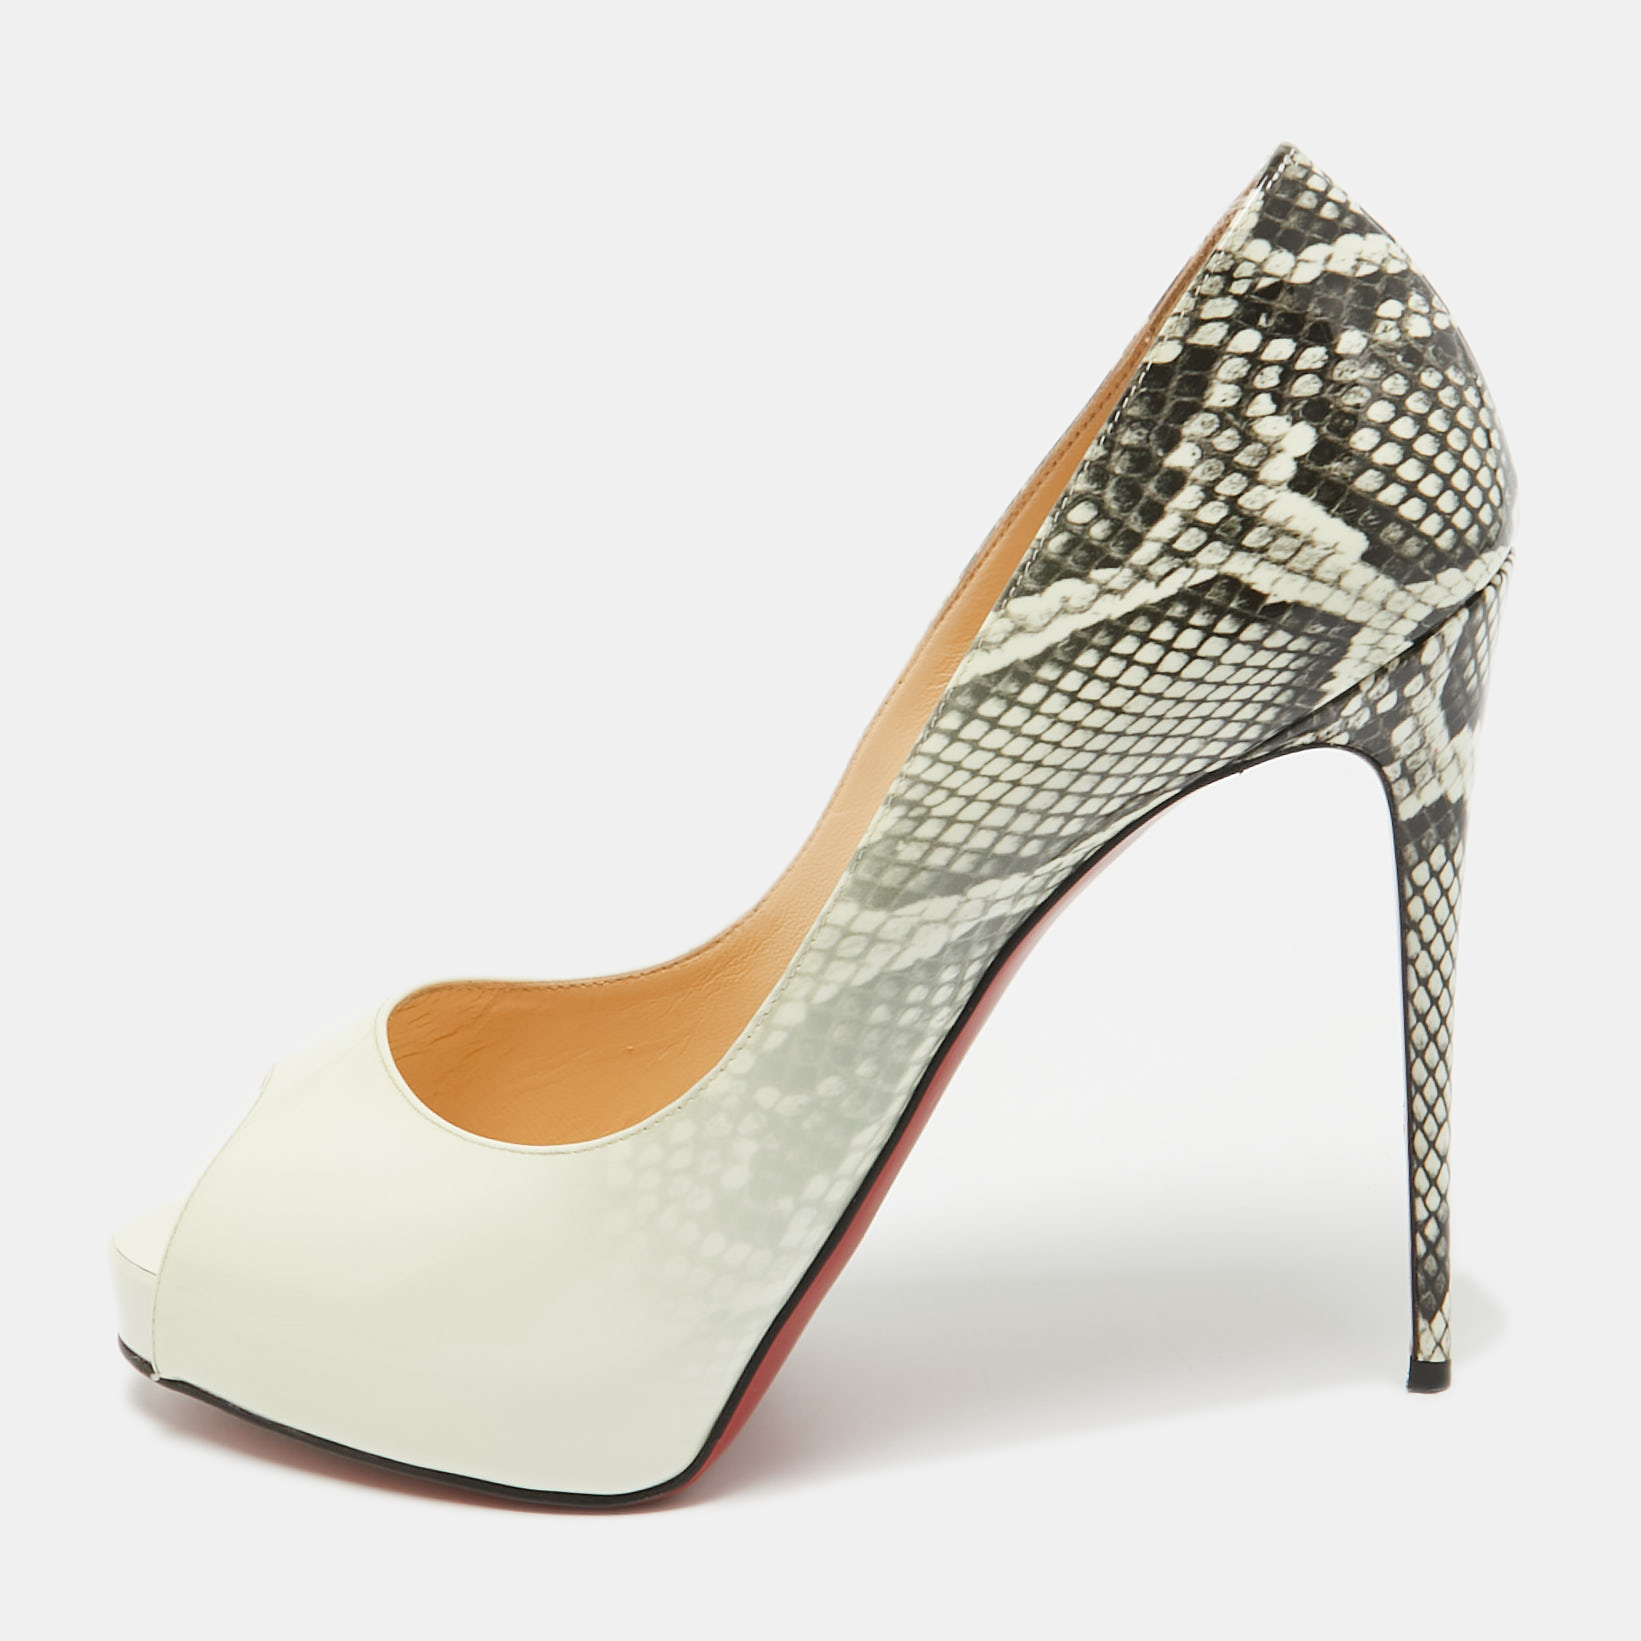 Pre-owned Christian Louboutin White/grey Degrade Snakeskin Print Patent Leather New Very Prive Pumps Size 40.5